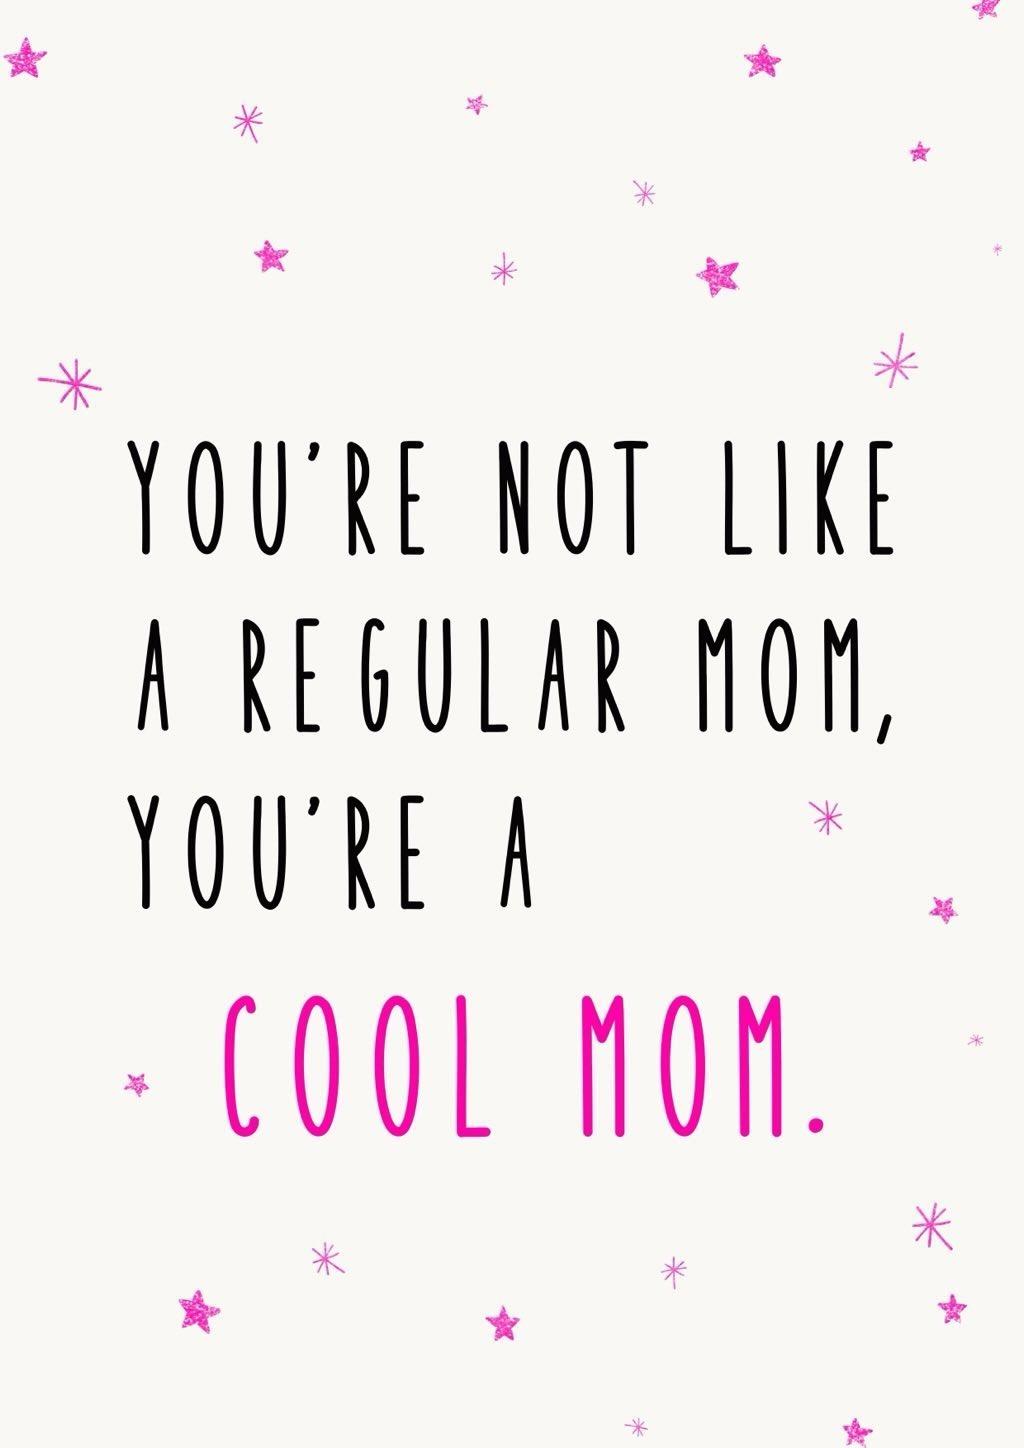 Mean Girls inspired - You're not like a regular mom....